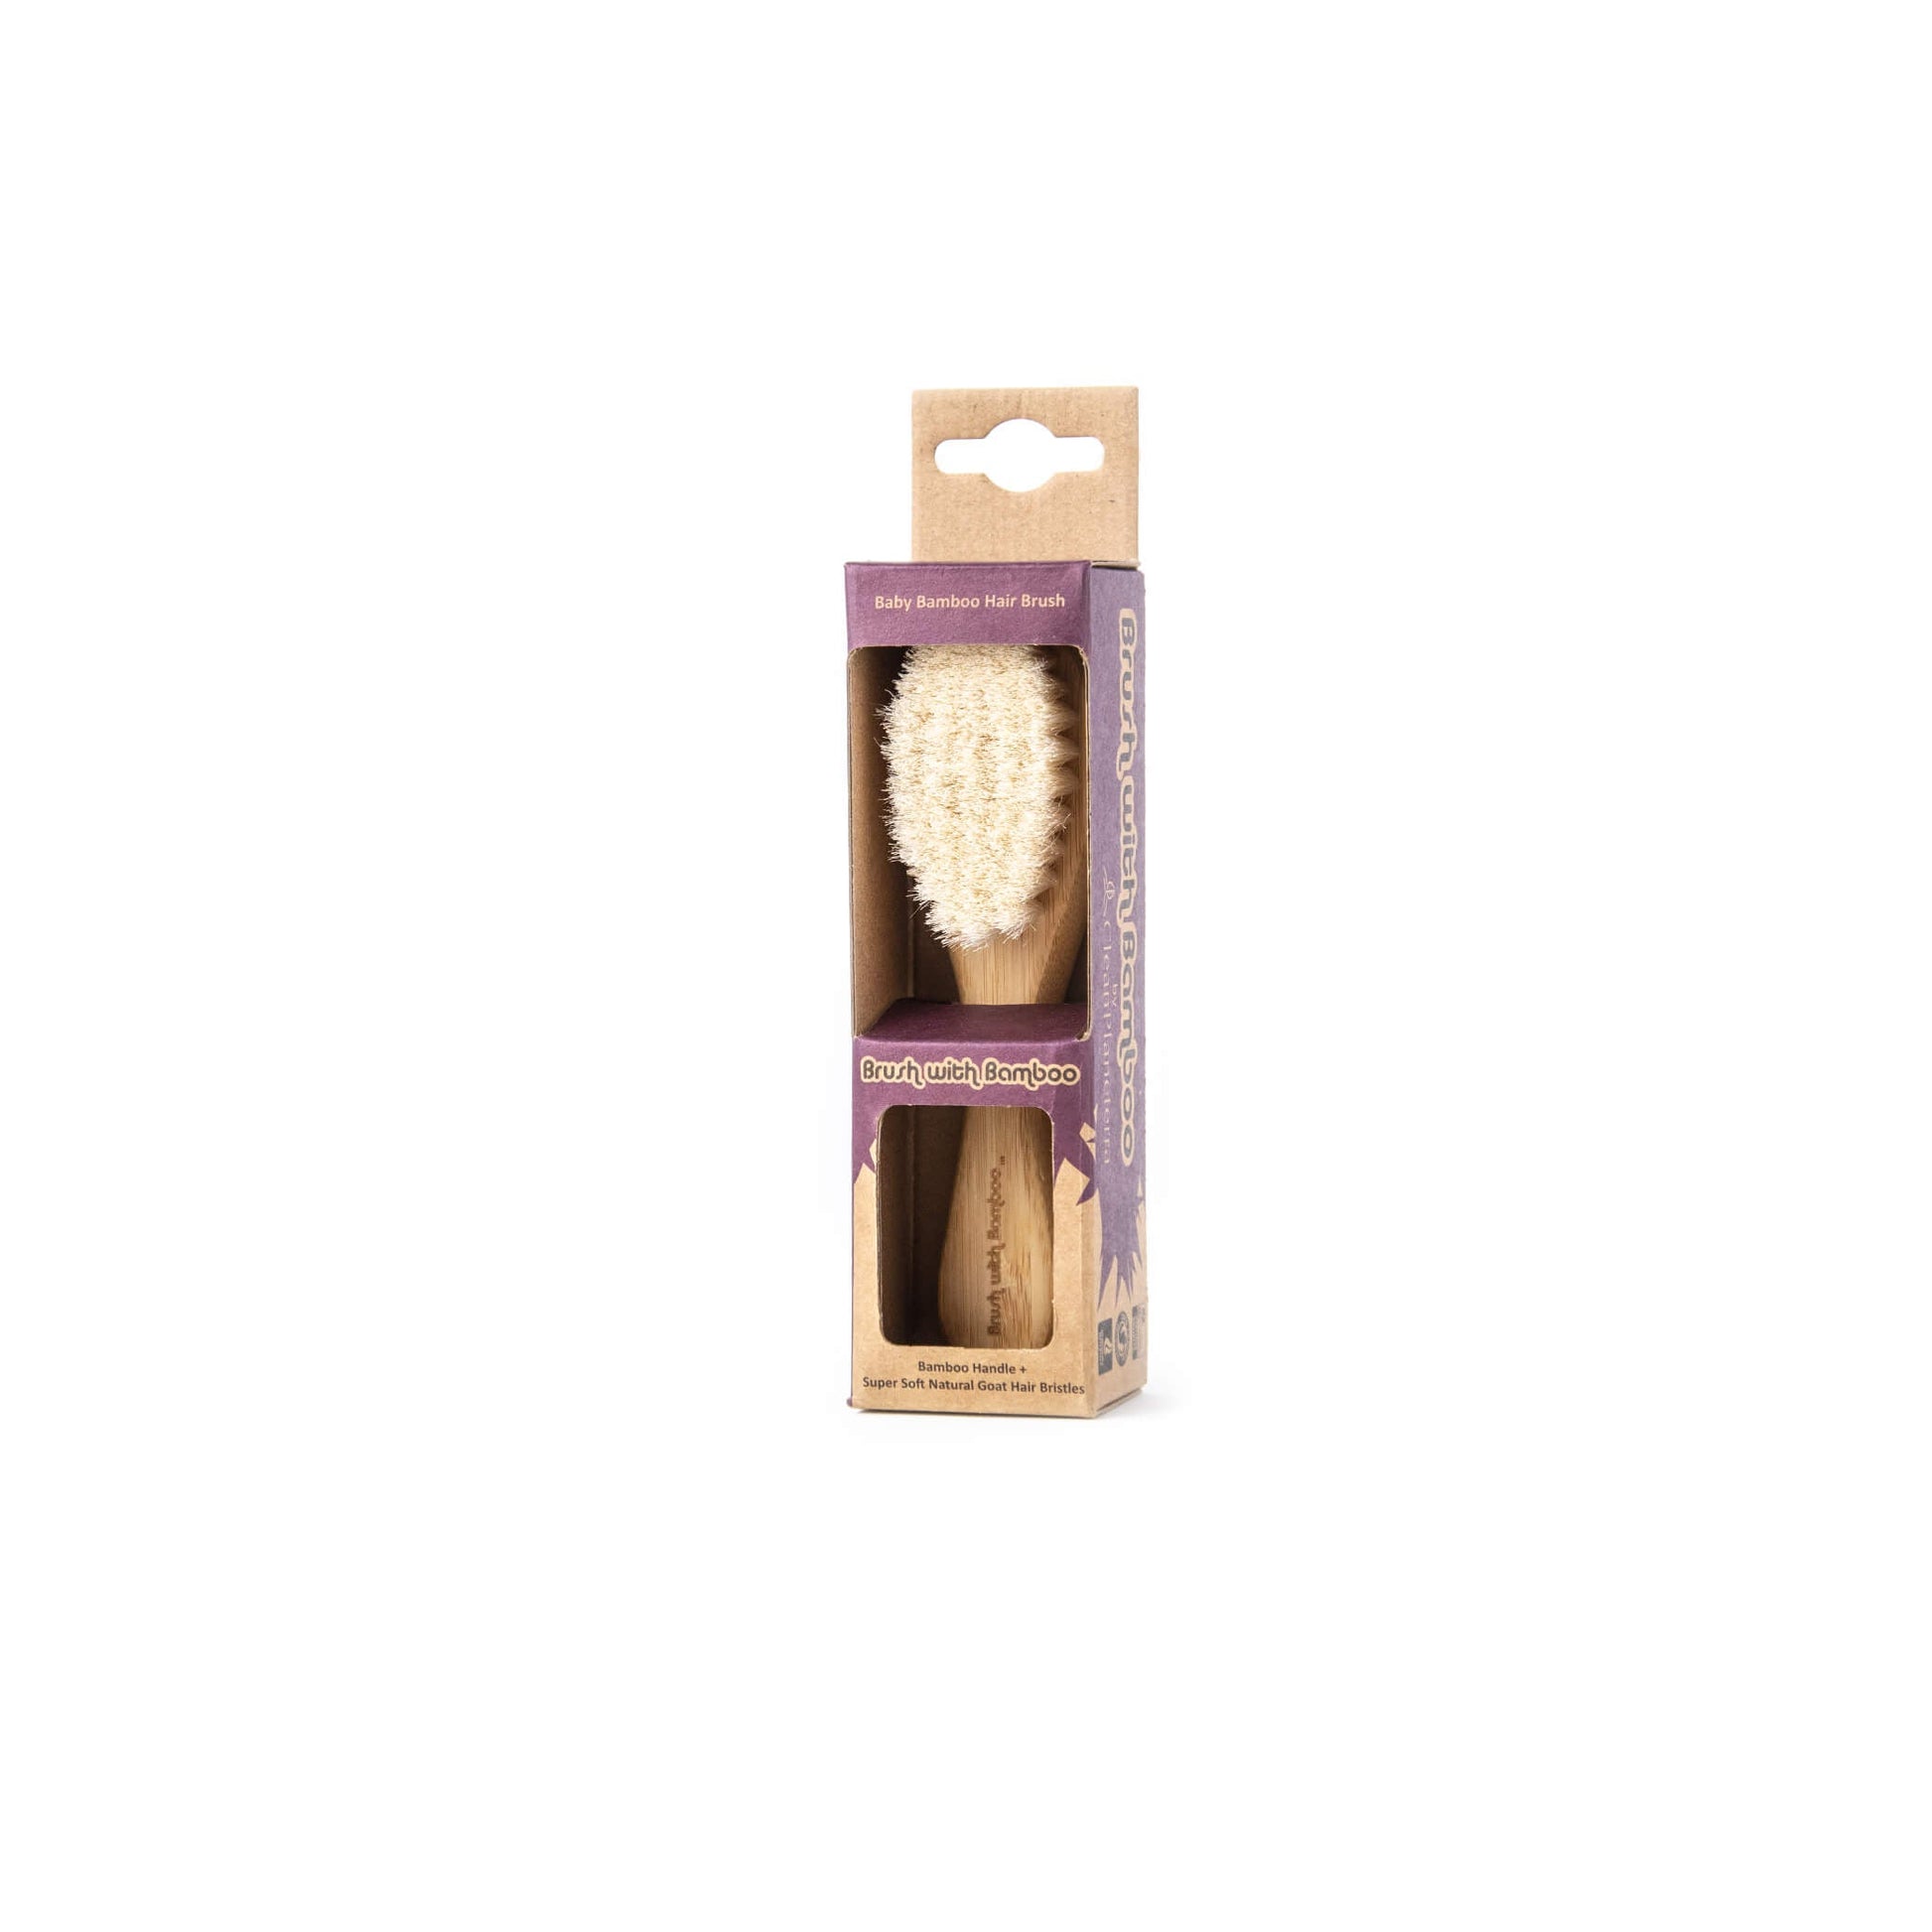 Plastic-free hairbrush for babies with natural and soft goat hair bristles.